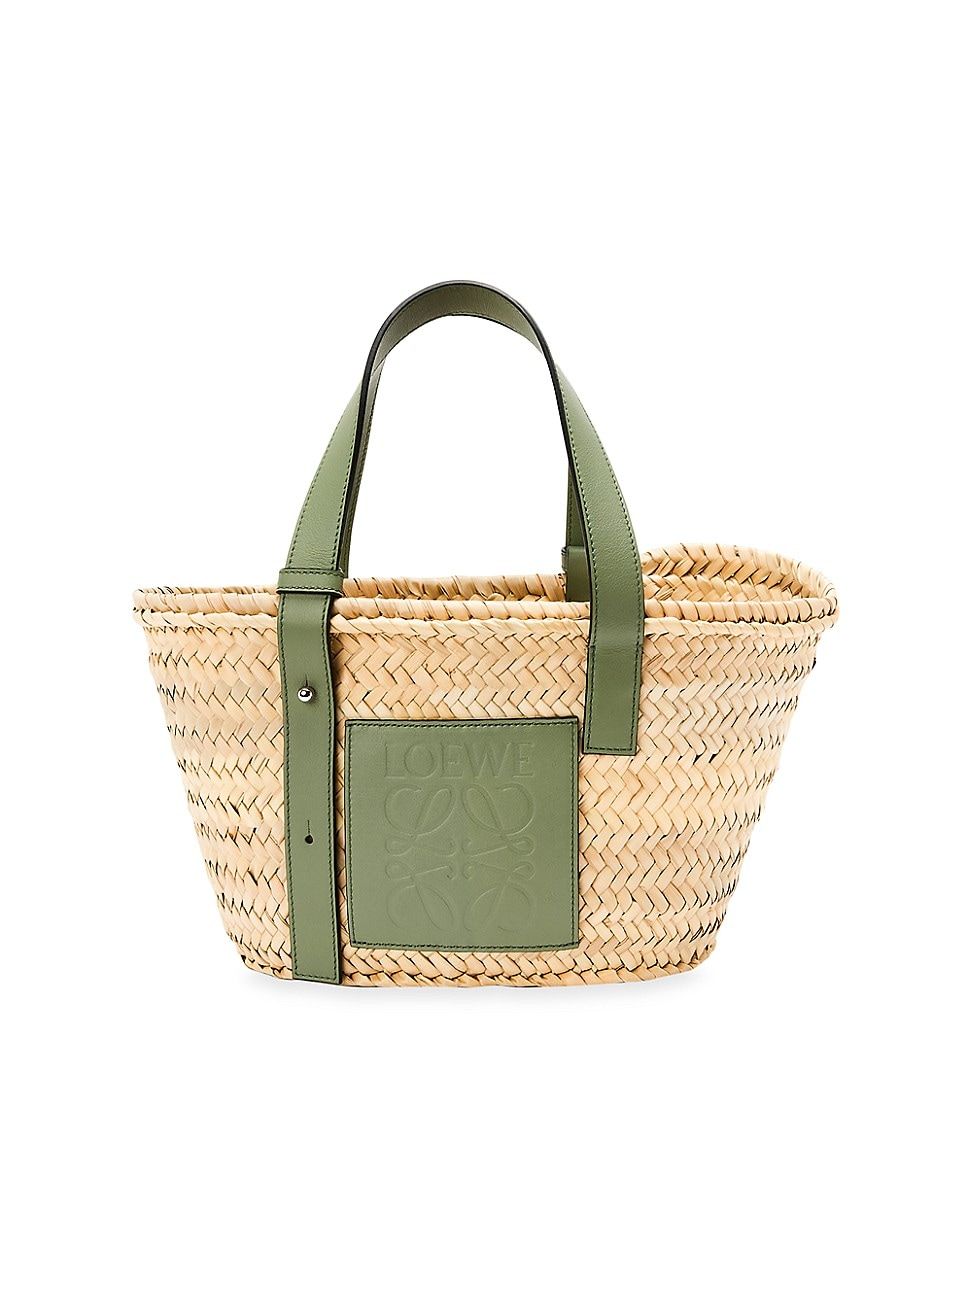 Women's Small Leather-Trimmed Woven Basket Bag - Natural Rosemary - Natural Rosemary - Size Small | Saks Fifth Avenue